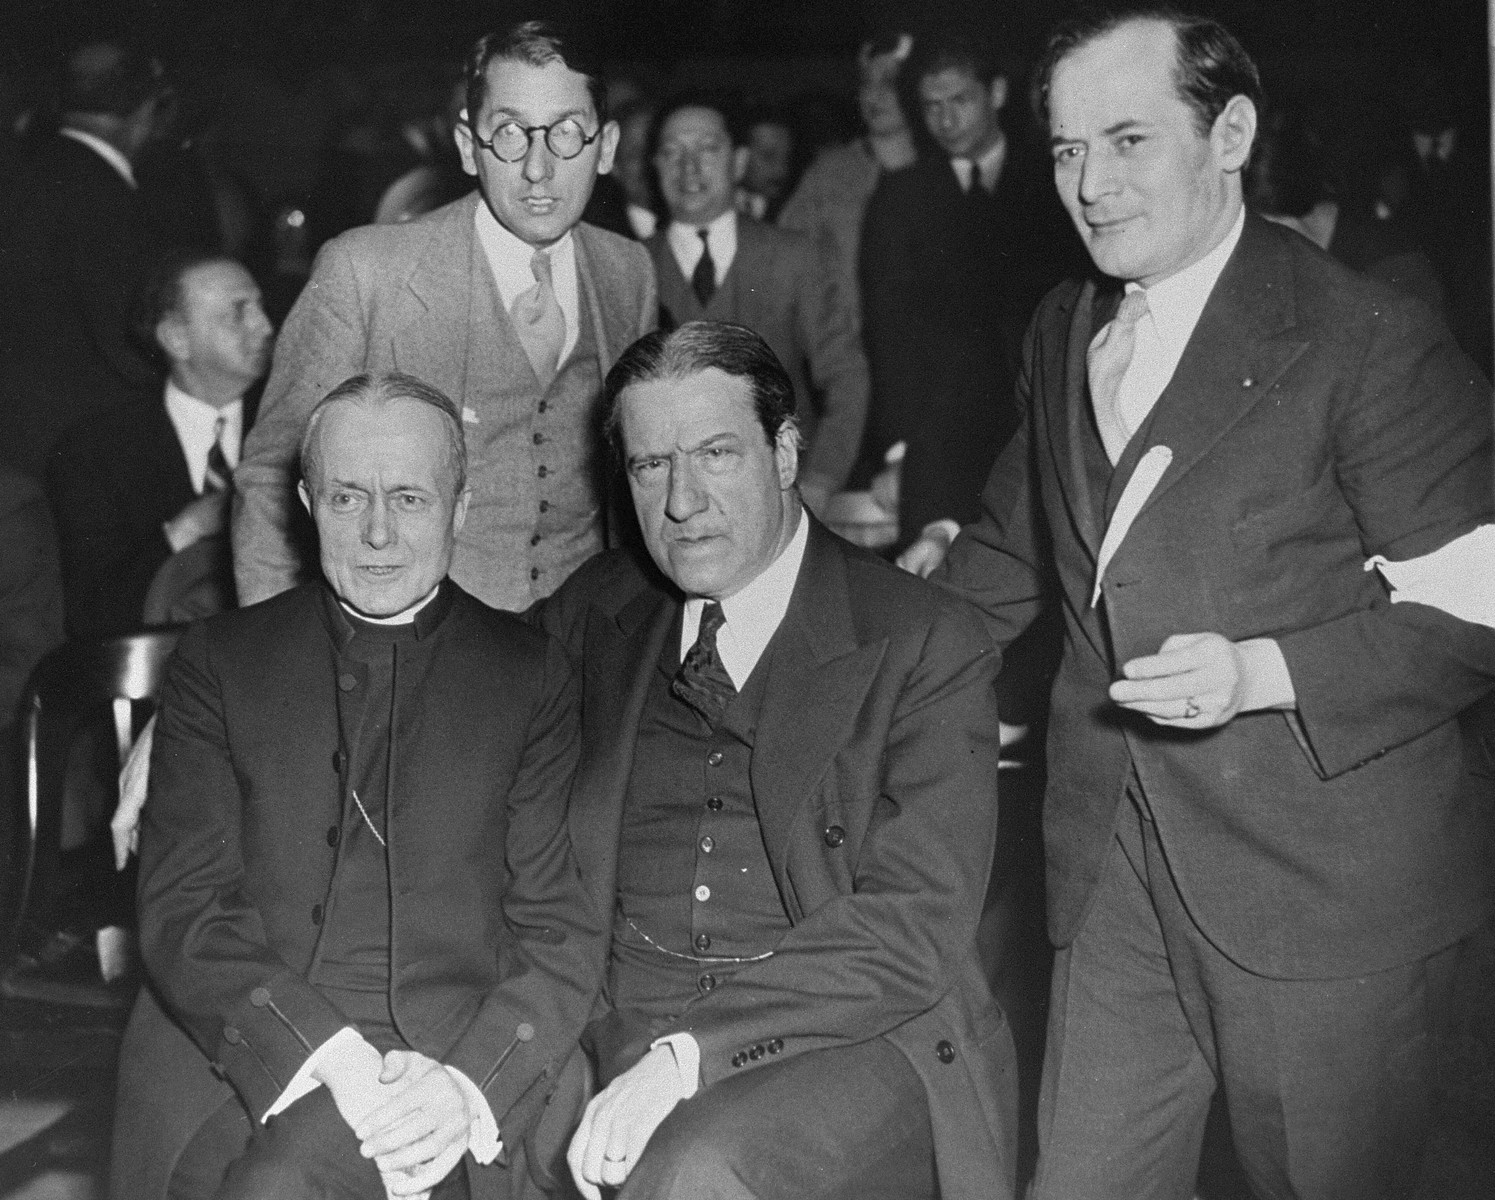 Bishop William T. Manning (lower left) and Rabbi Stephen Wise (center) attend a mass rally at Madison Square Garden to protest against the enactment of anti-Jewish legislation by the Nazi regime and the acts of terror and incitement against German Jewry perpetrated by the new government.